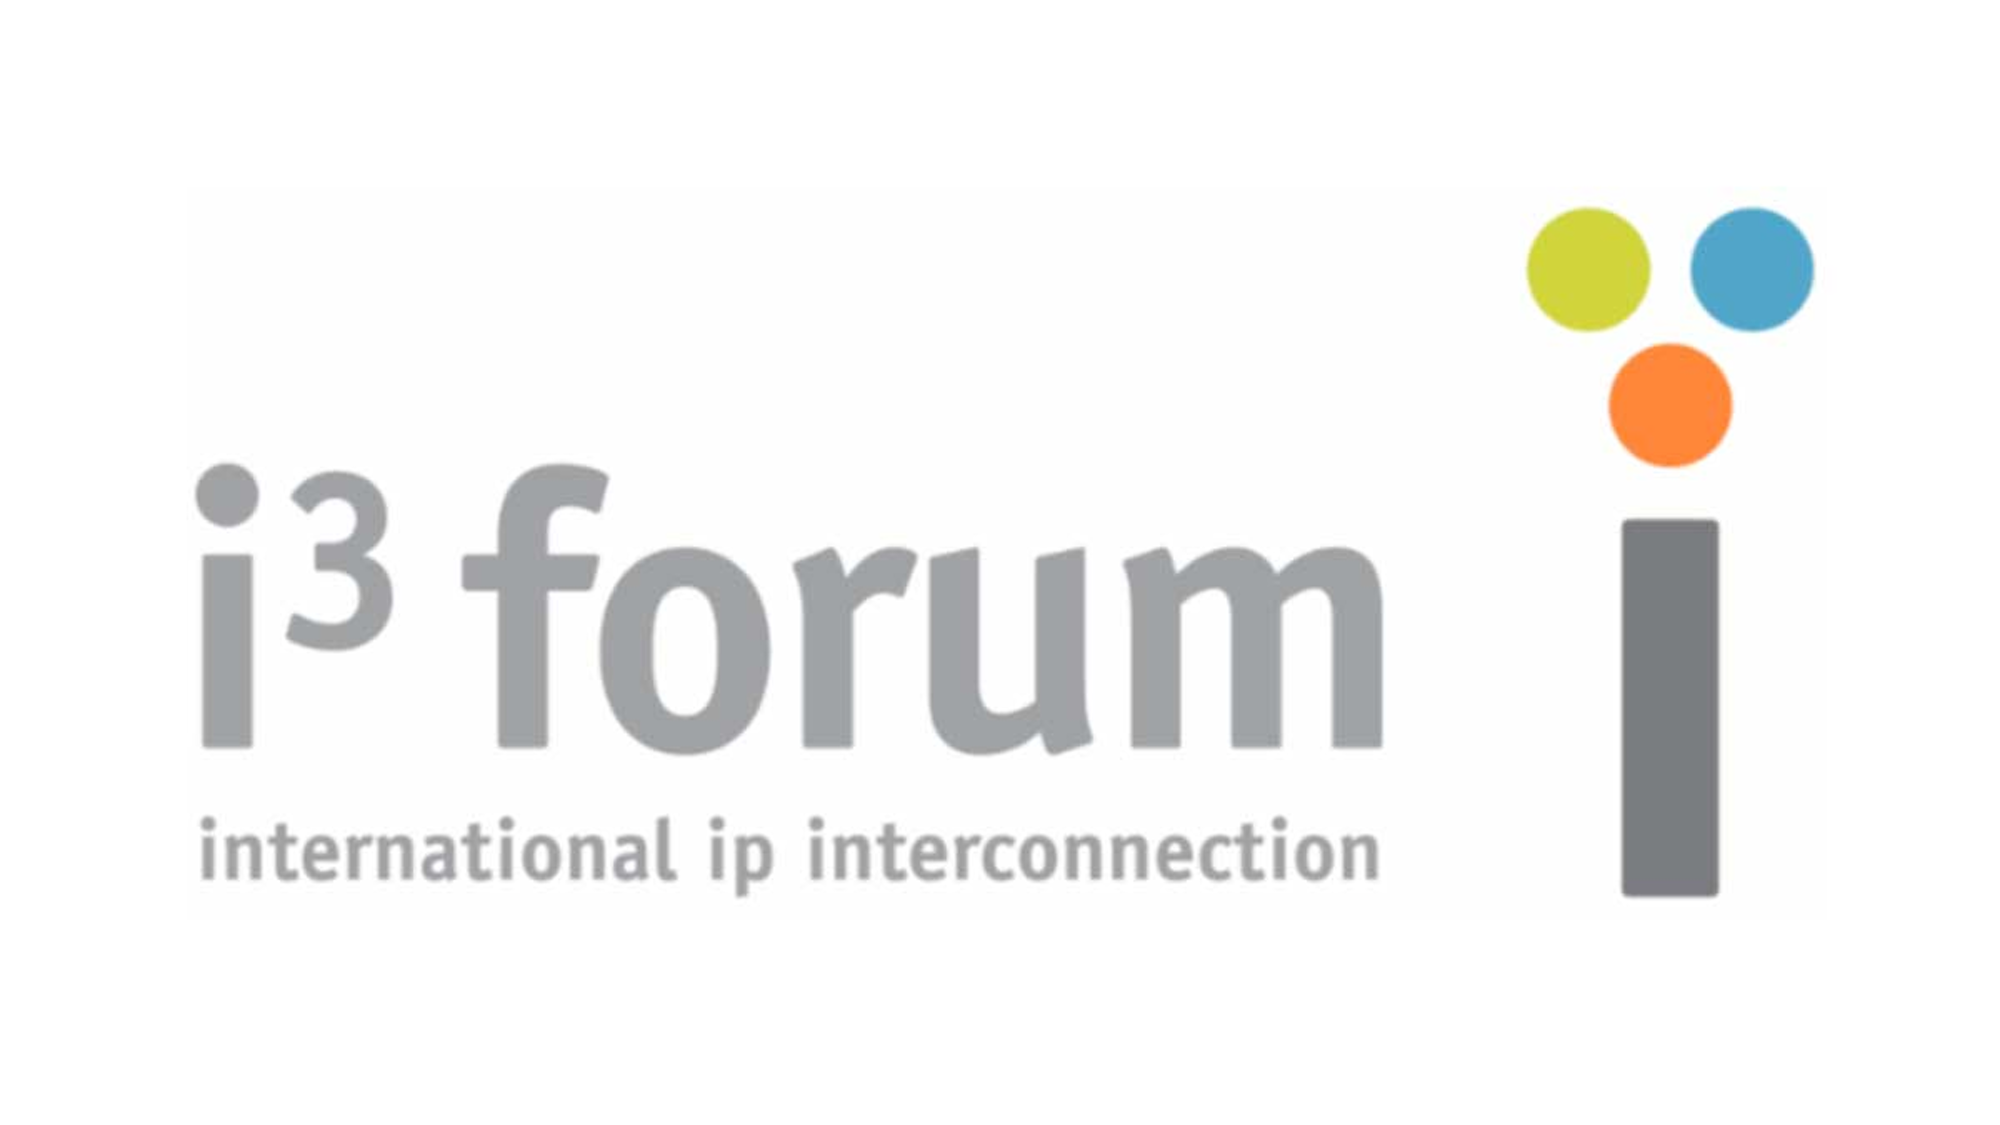 XConnect Joins i3forum to Add Support to the Global Telecoms Ecosystem’s Drive to build Trust in Communications